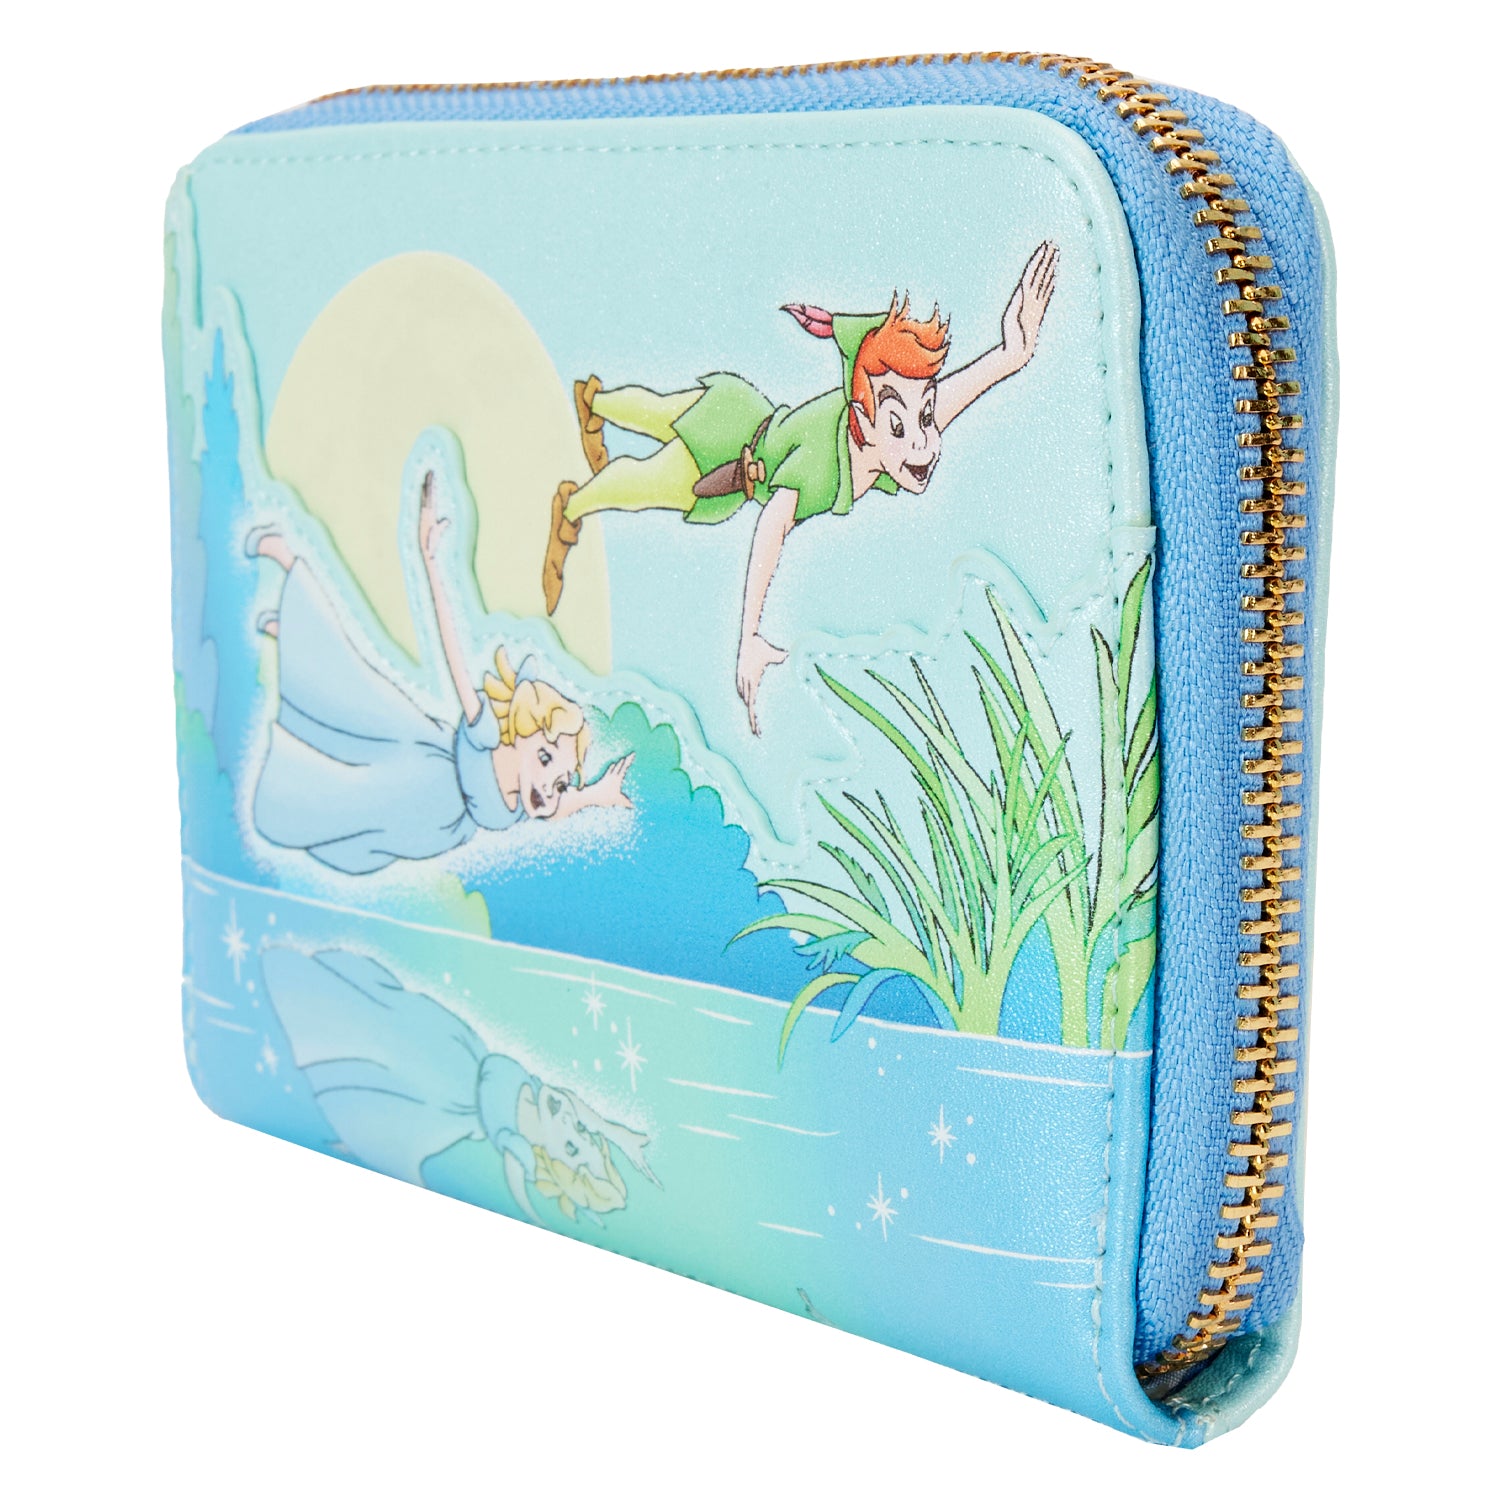 Loungefly x Disney Peter Pan You Can Fly Wallet